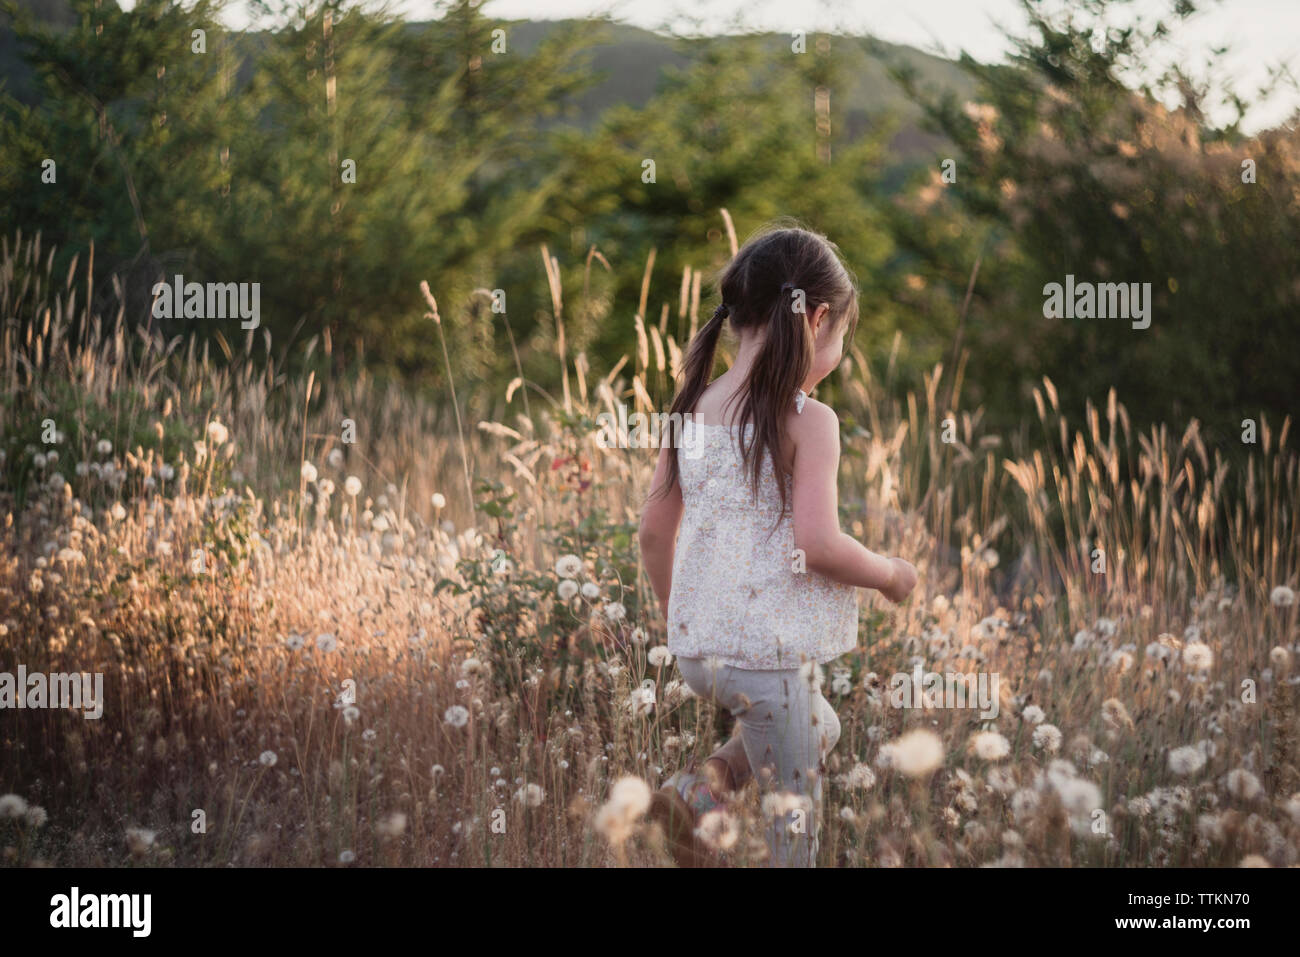 Girl with pigtails walking amidst dandelion field Stock Photo